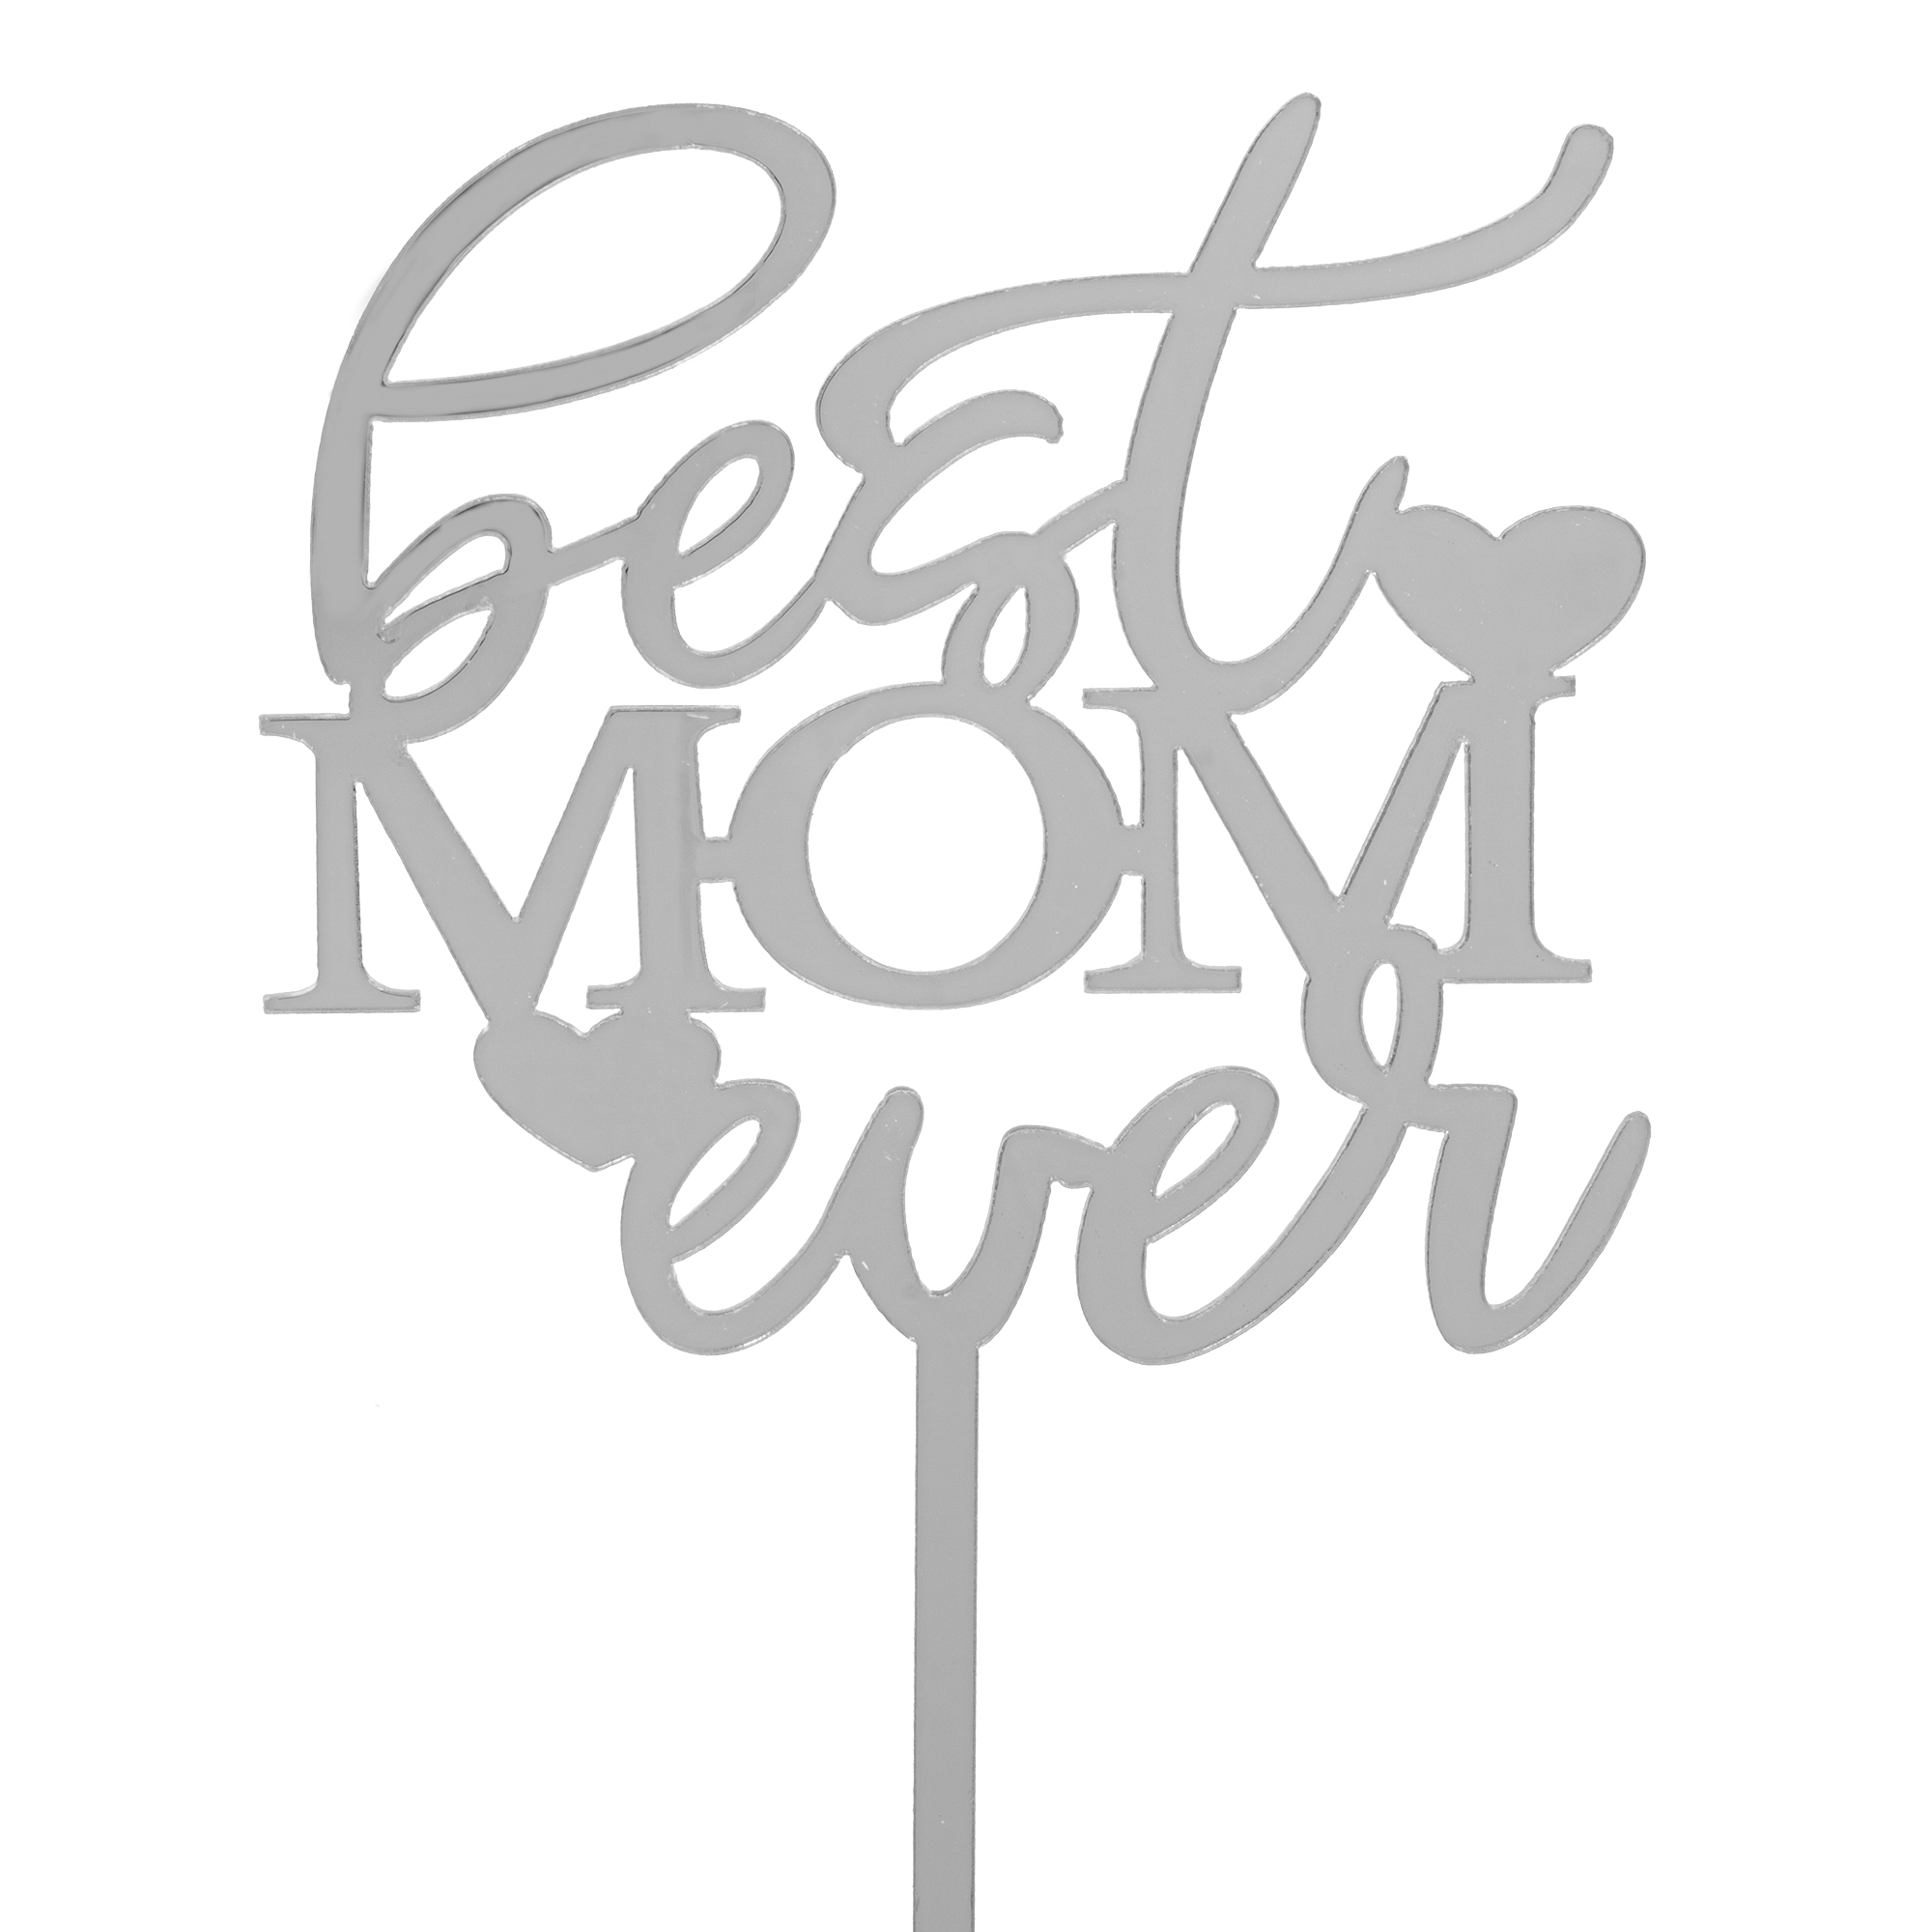 Acrylic Mirrored Cake Topper 6½” "BEST MOM EVER" - Silver